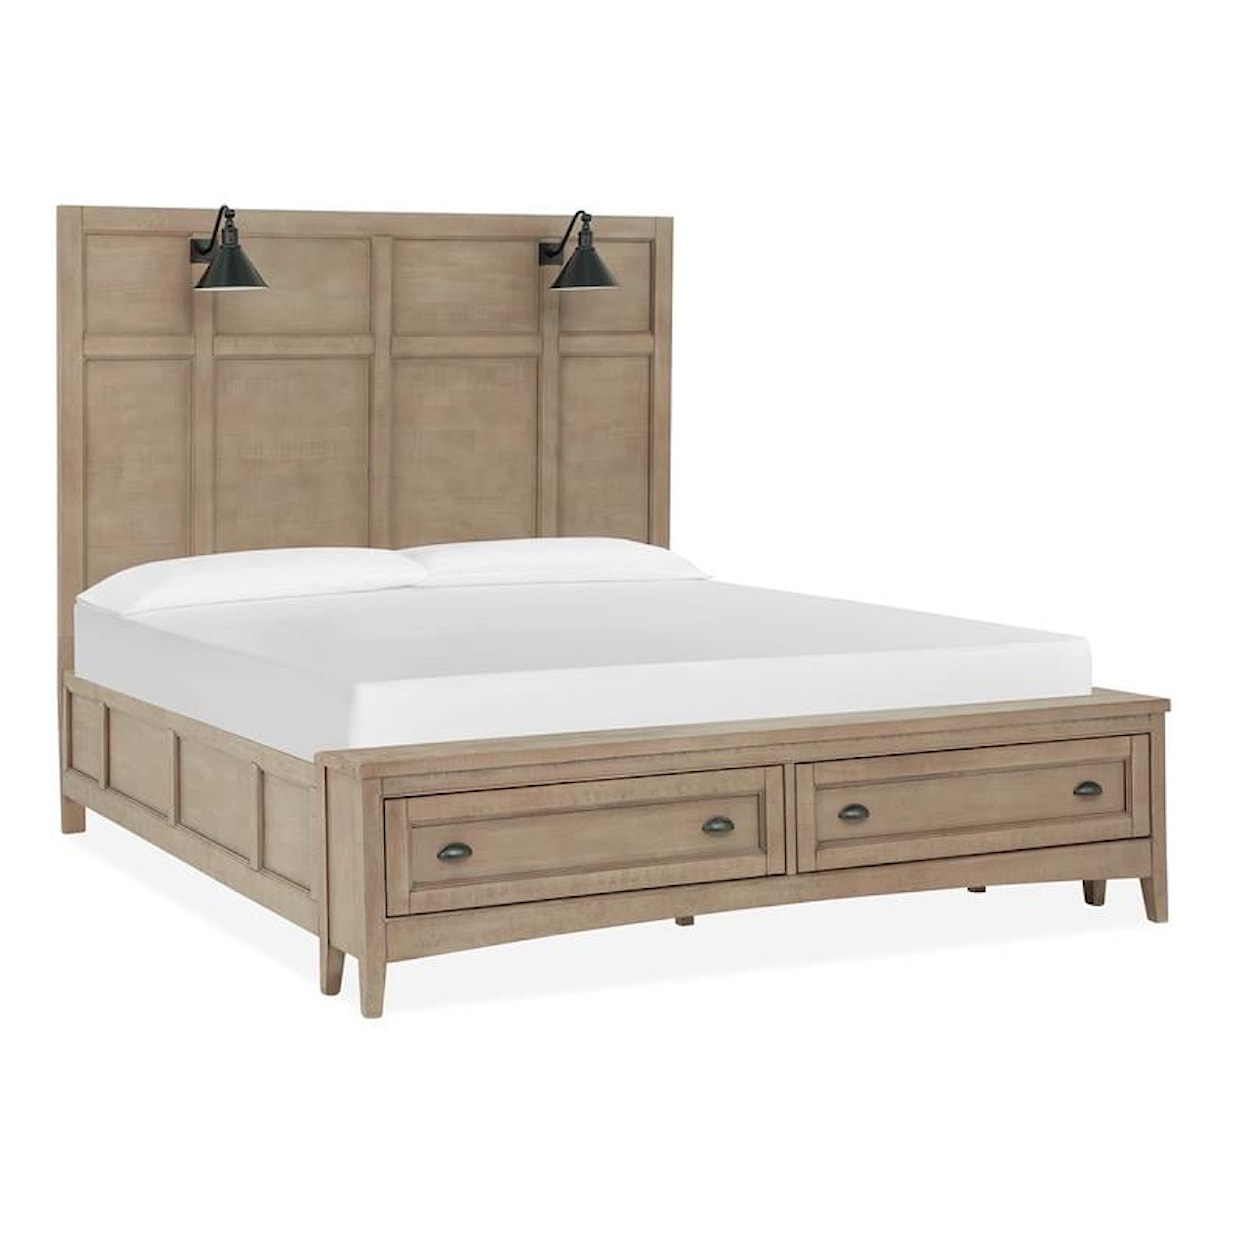 Magnussen Home Paxton Place Bedroom King Lamp Panel Storage Bed